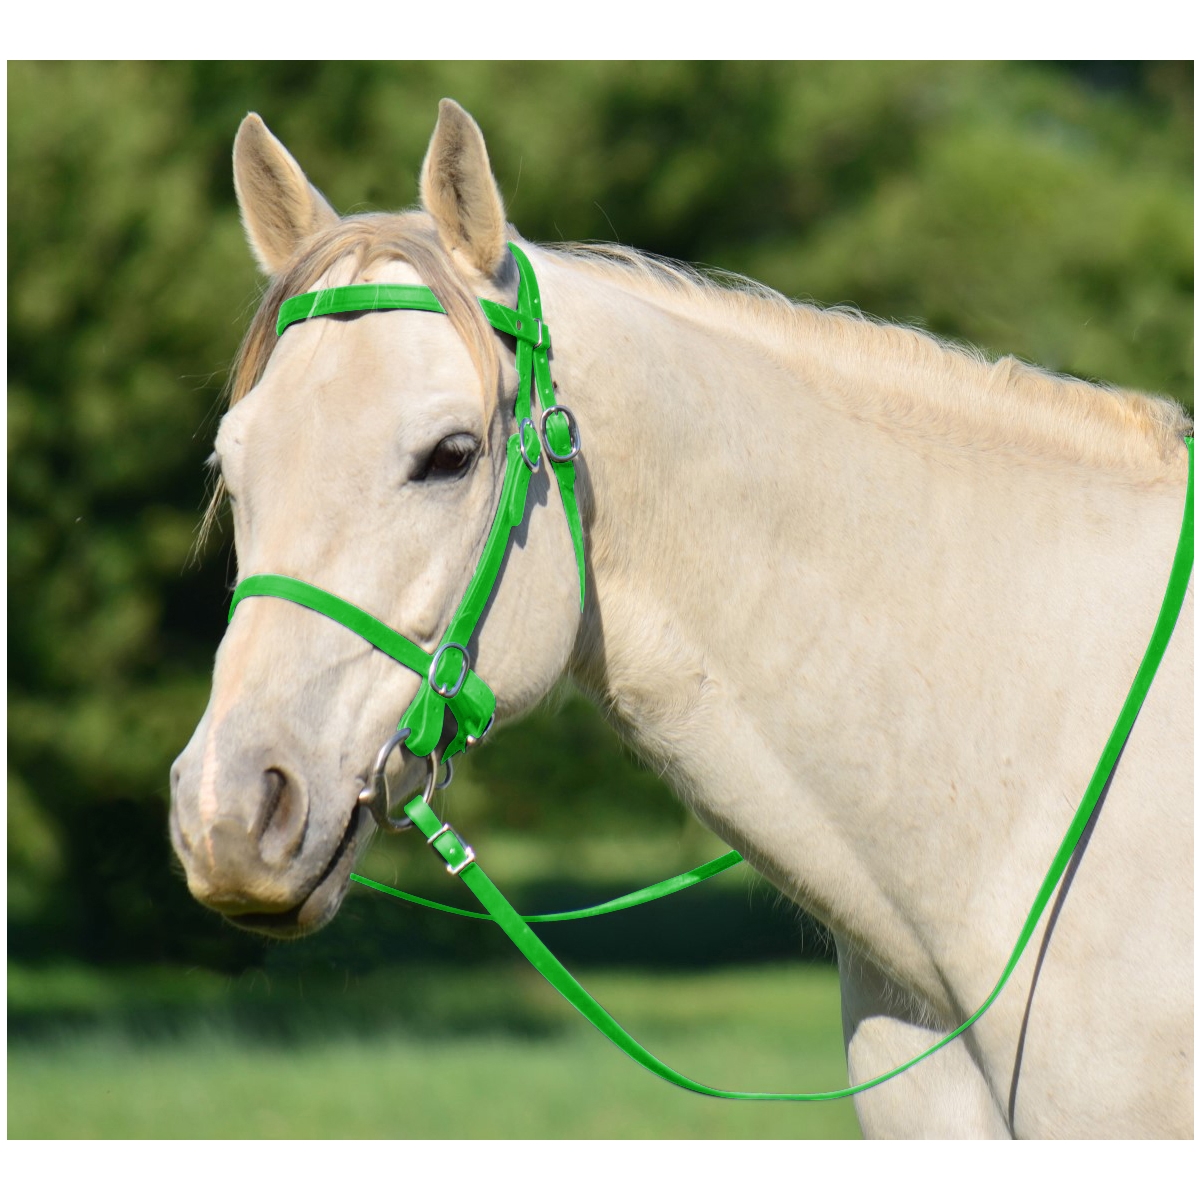 Halter Bridle for Horses - Two Horse Tack